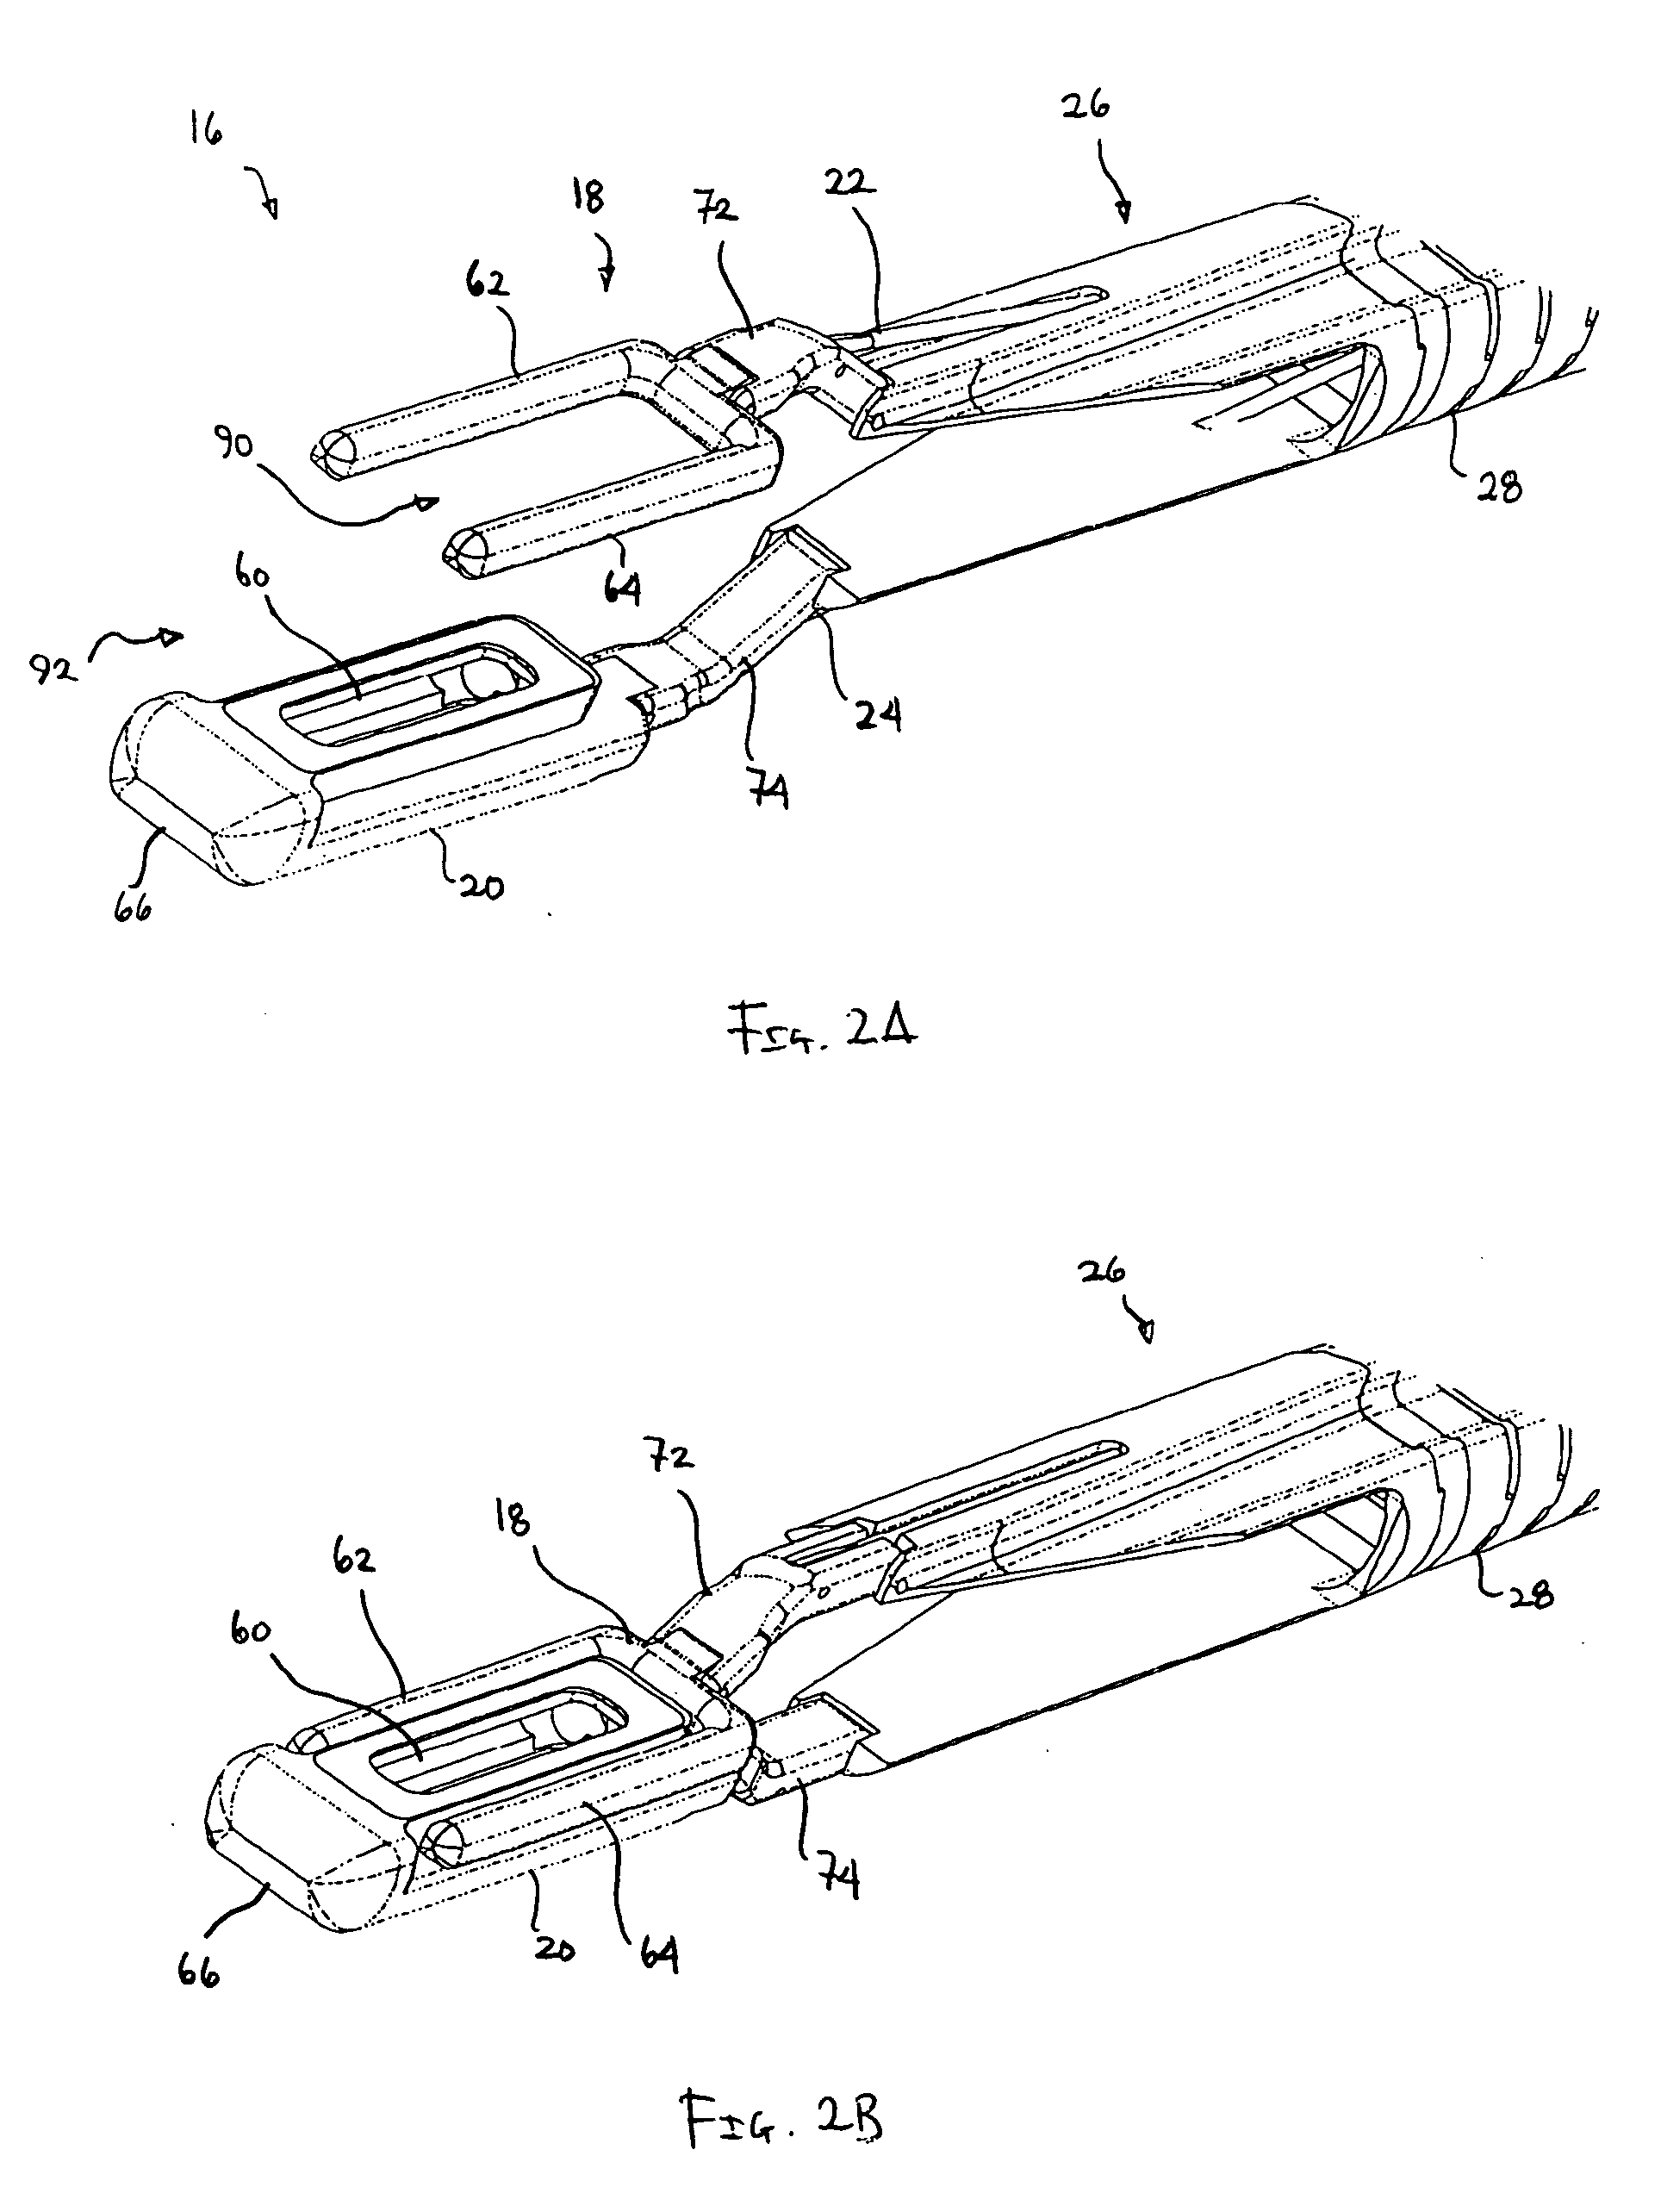 Single-fold system for tissue approximation and fixation